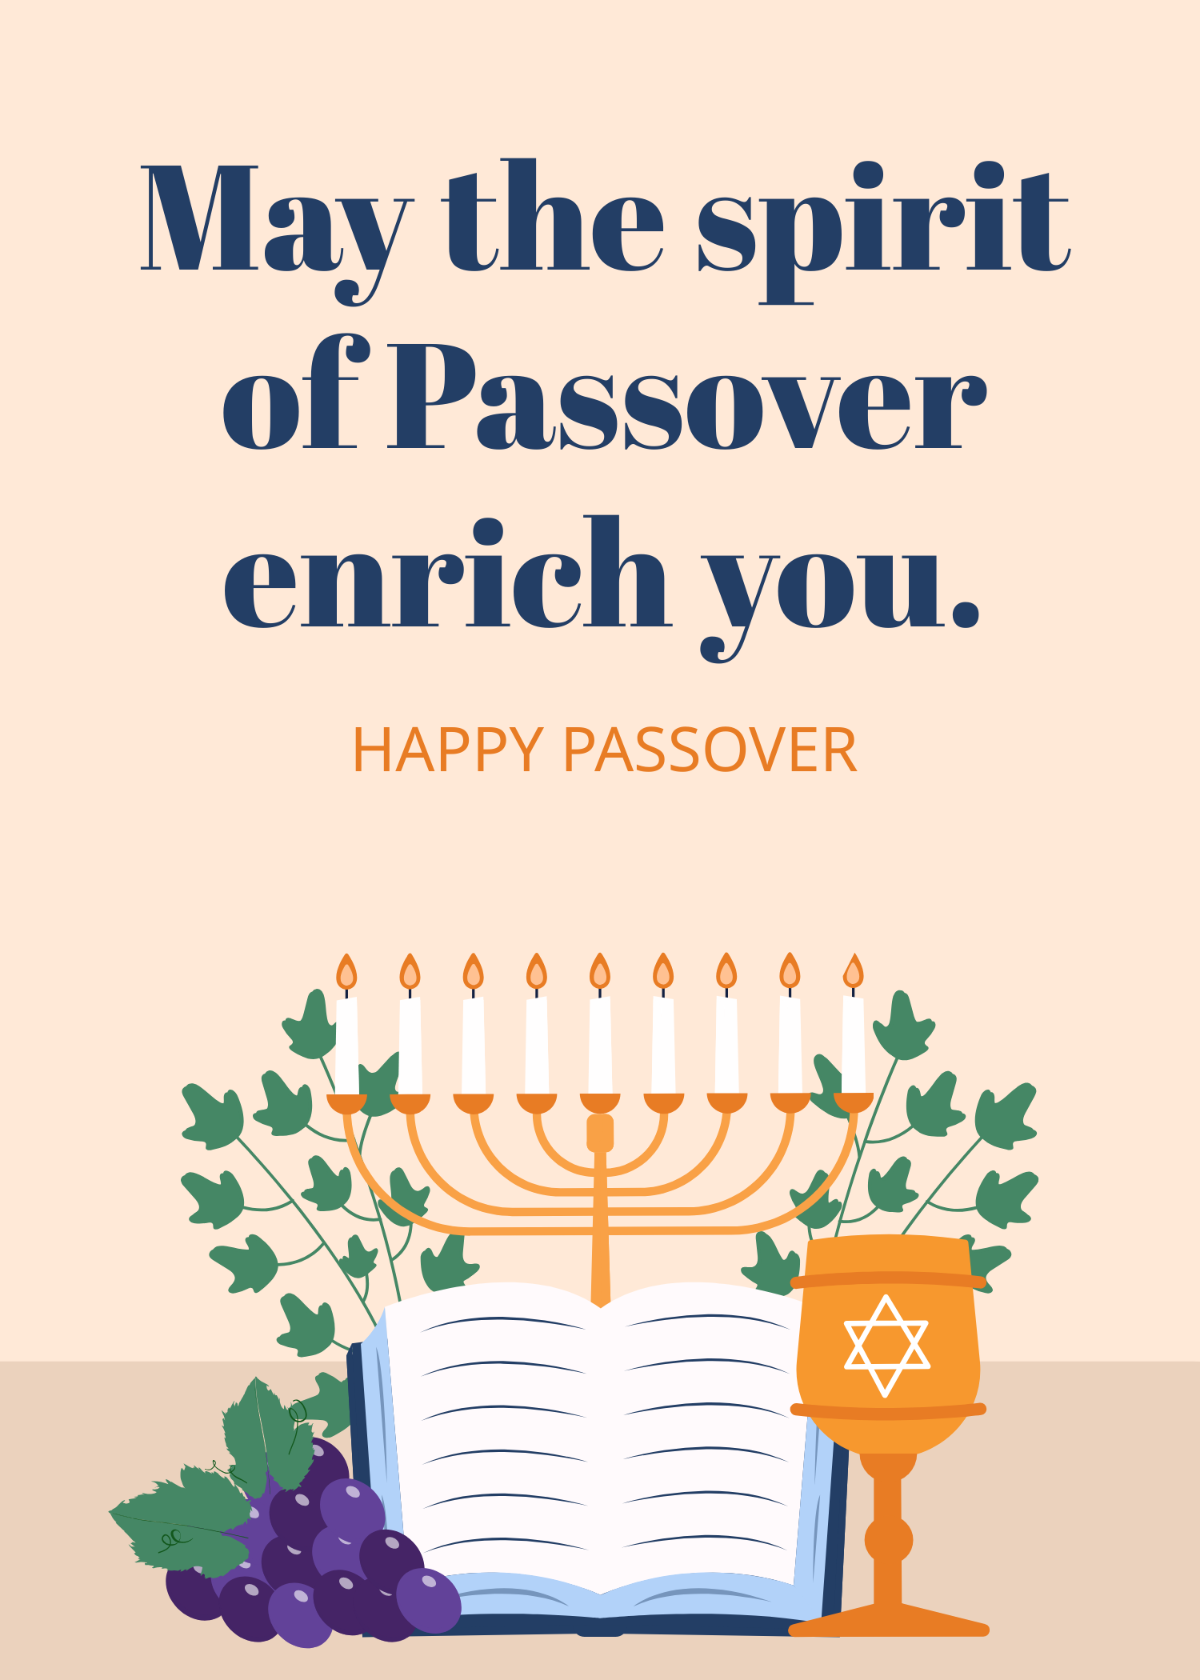 Passover Greeting Card Template